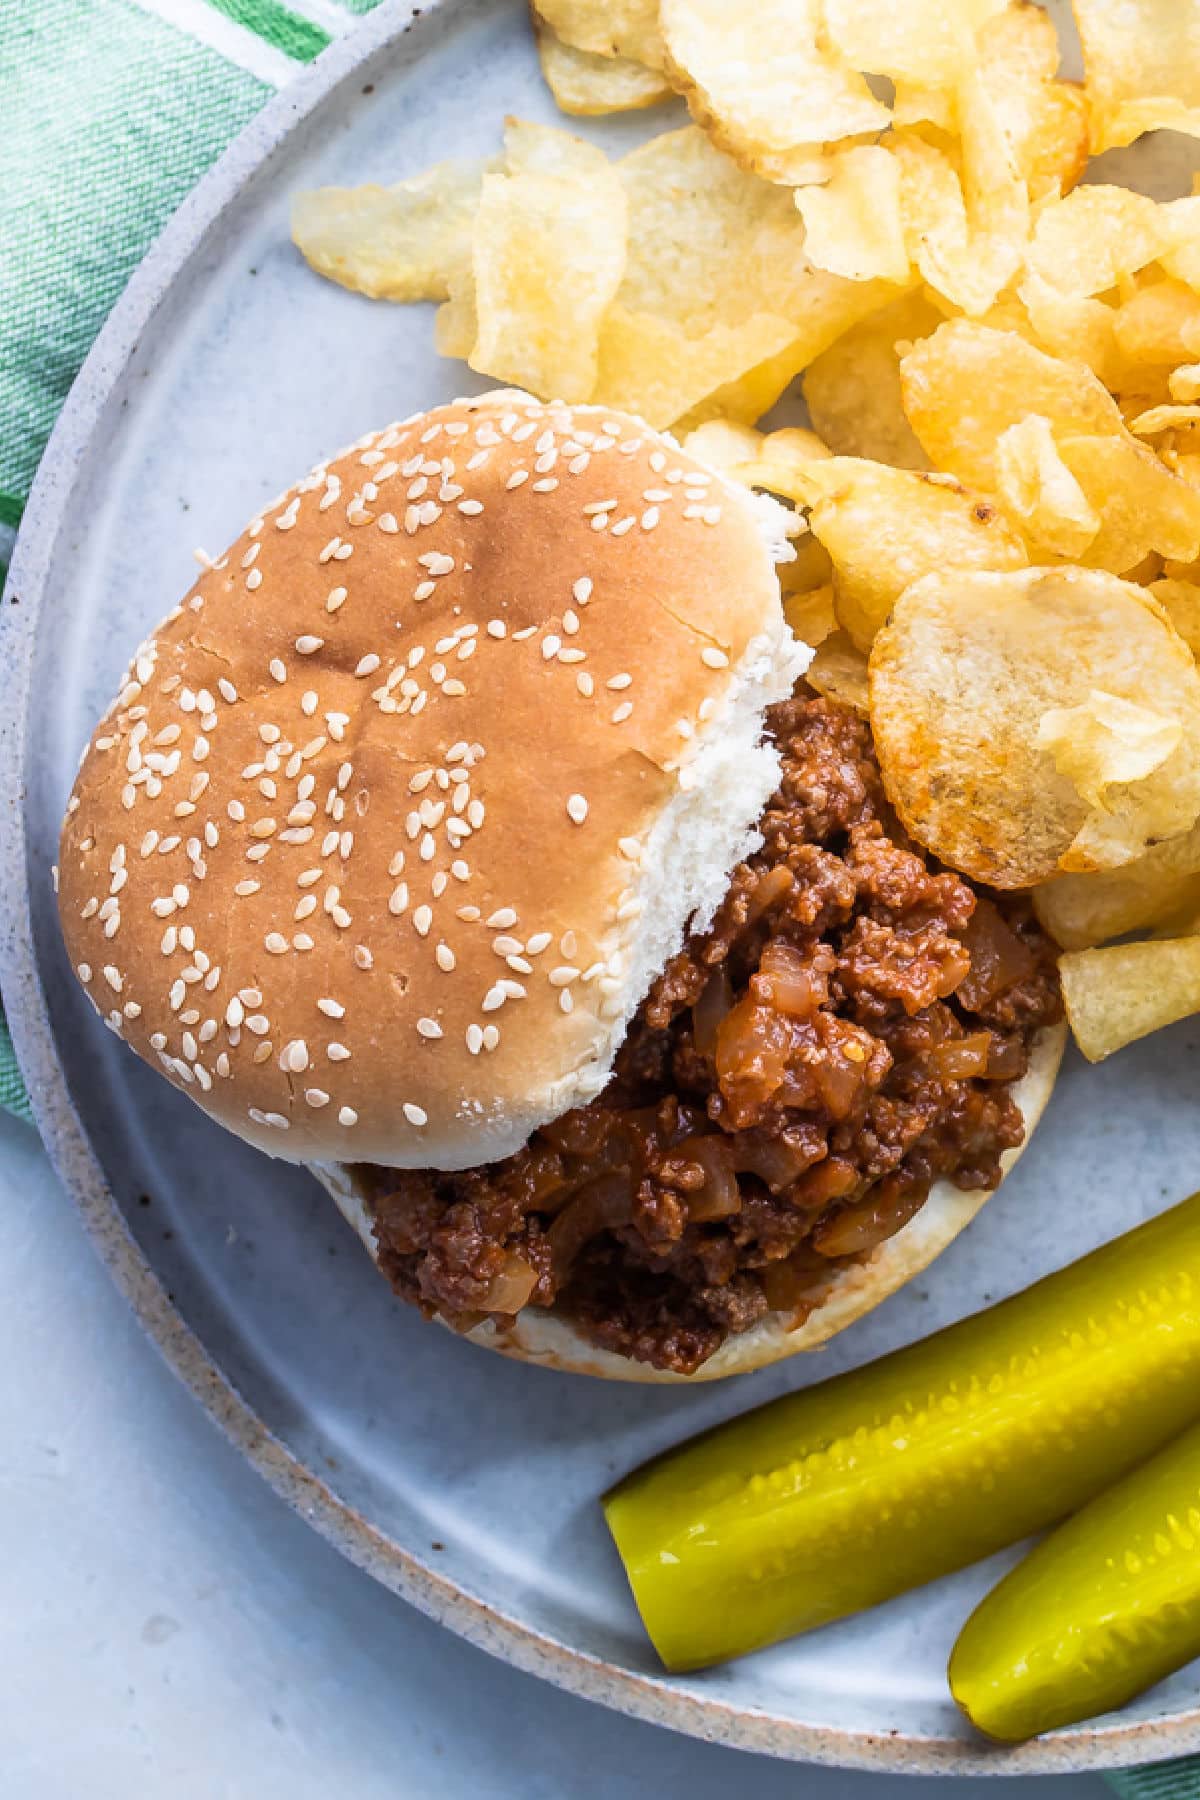 A sloppy joe on a bun with chips and pickles on a blue plate.